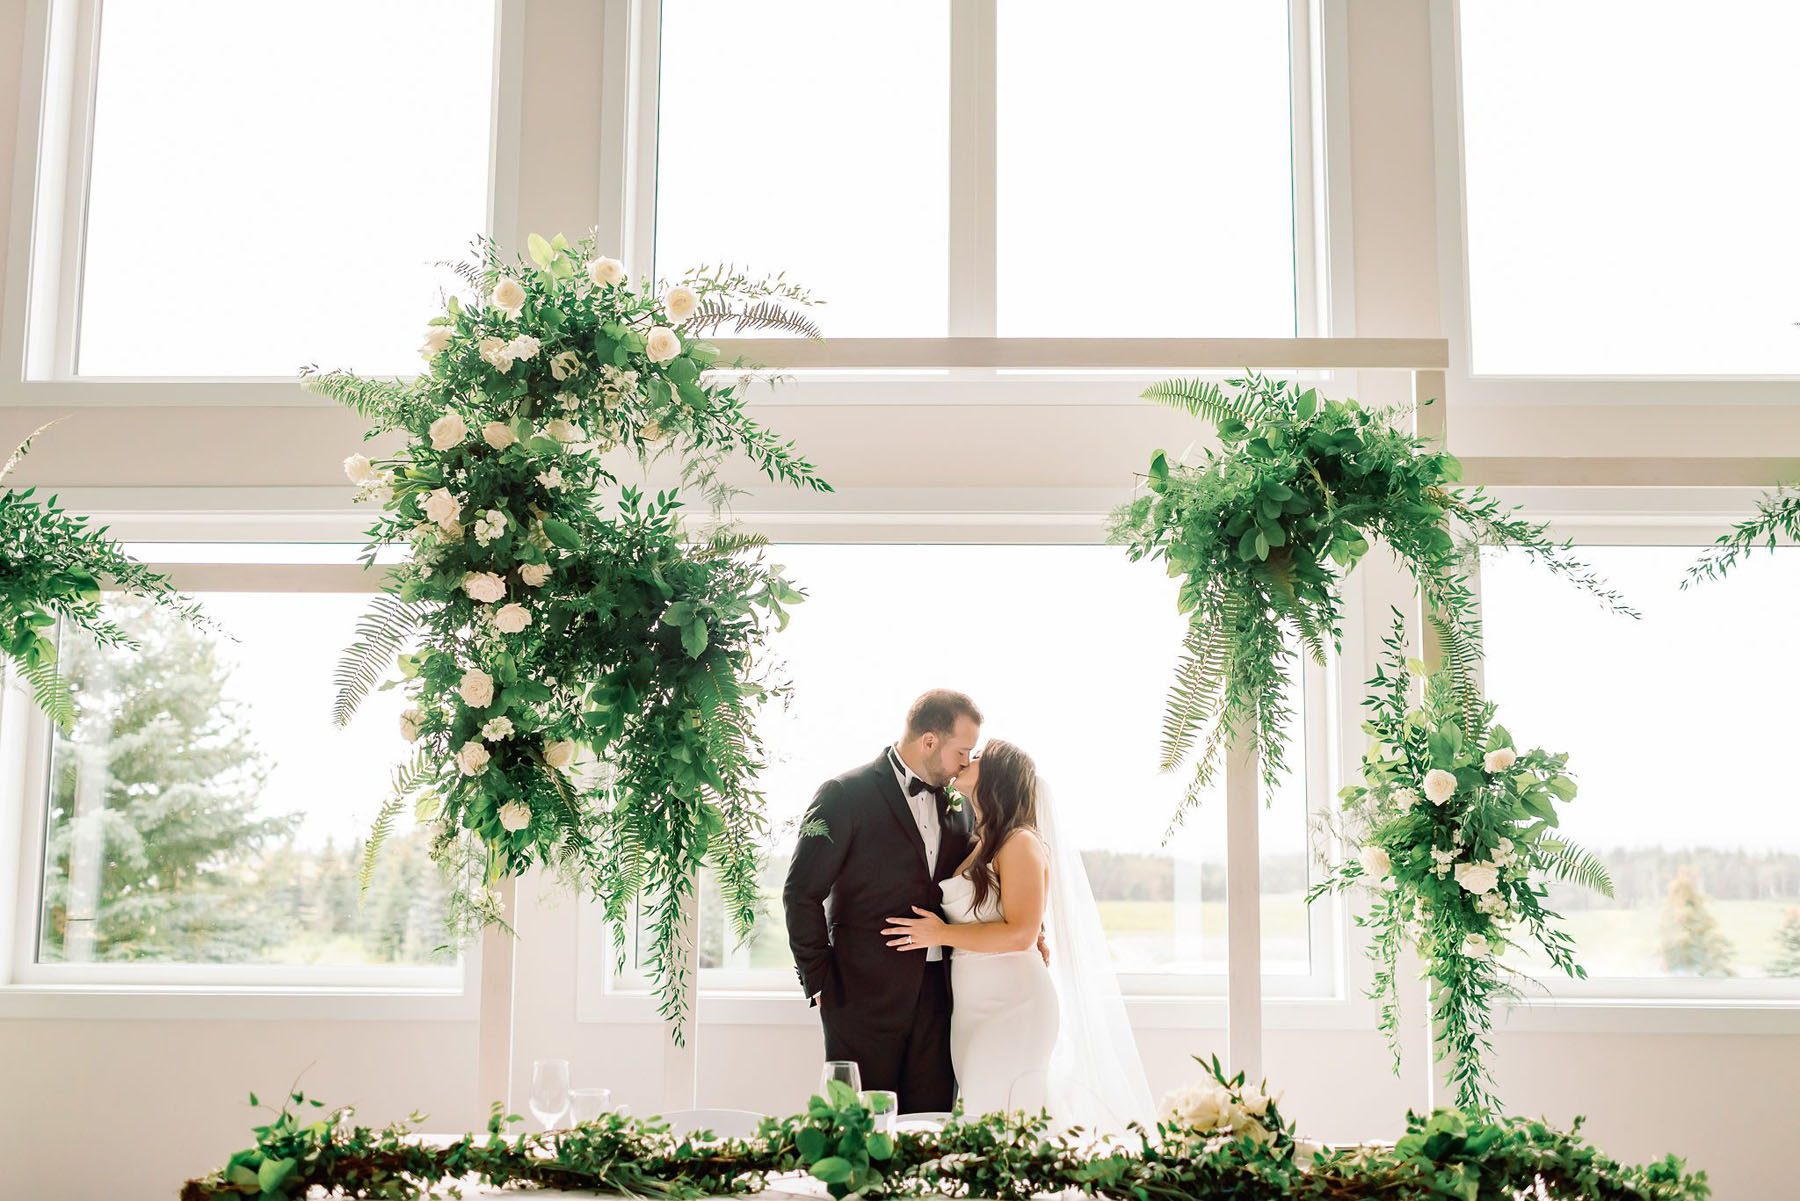 Bride and groom kissing behind a head table decorated with branches and greenery. Multiple large fern, leaves and blush flower arrangements frame them.